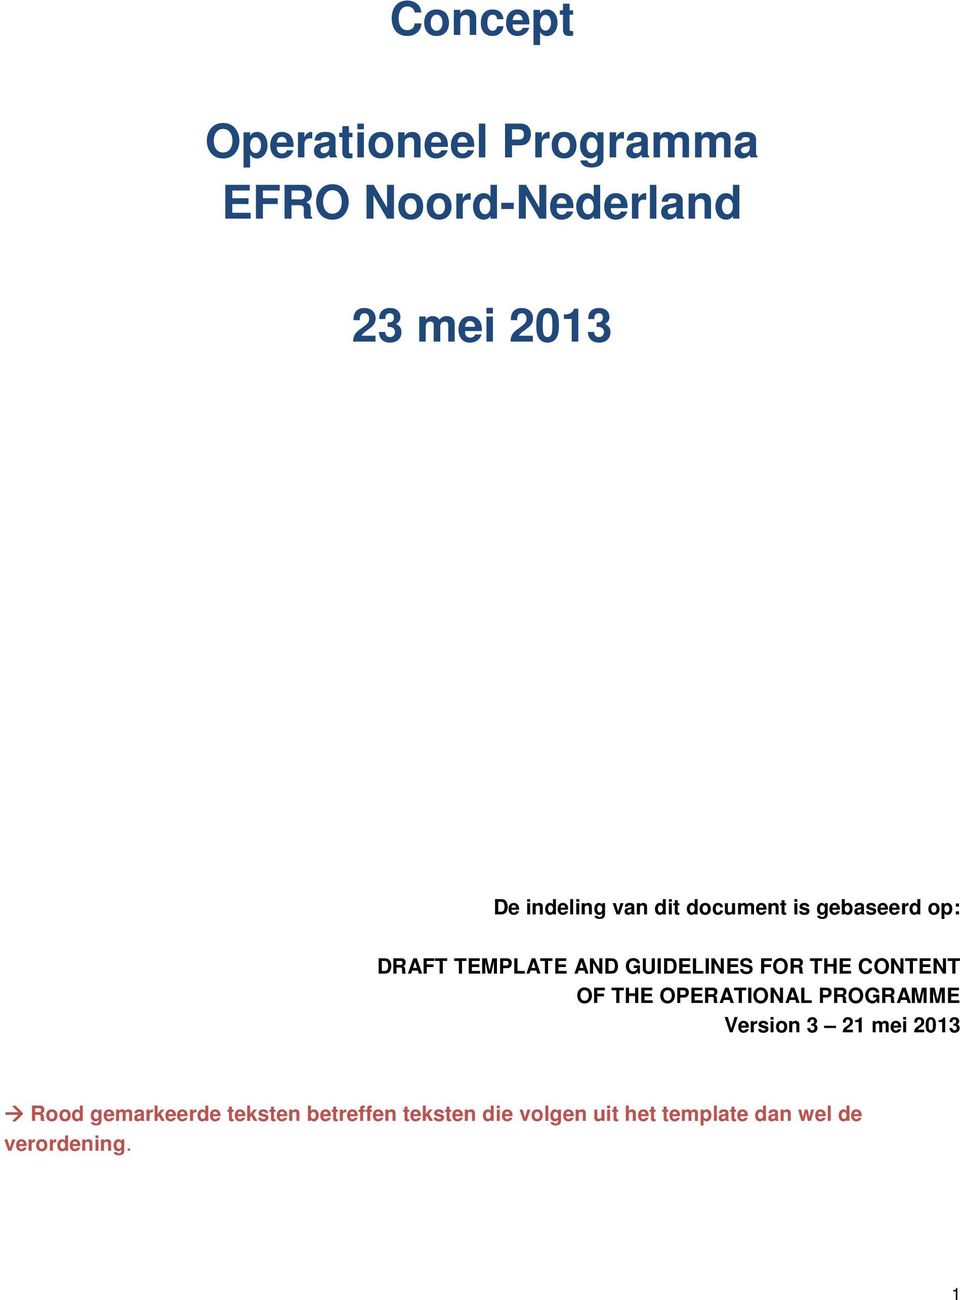 CONTENT OF THE OPERATIONAL PROGRAMME Version 3 21 mei 2013 Rood gemarkeerde